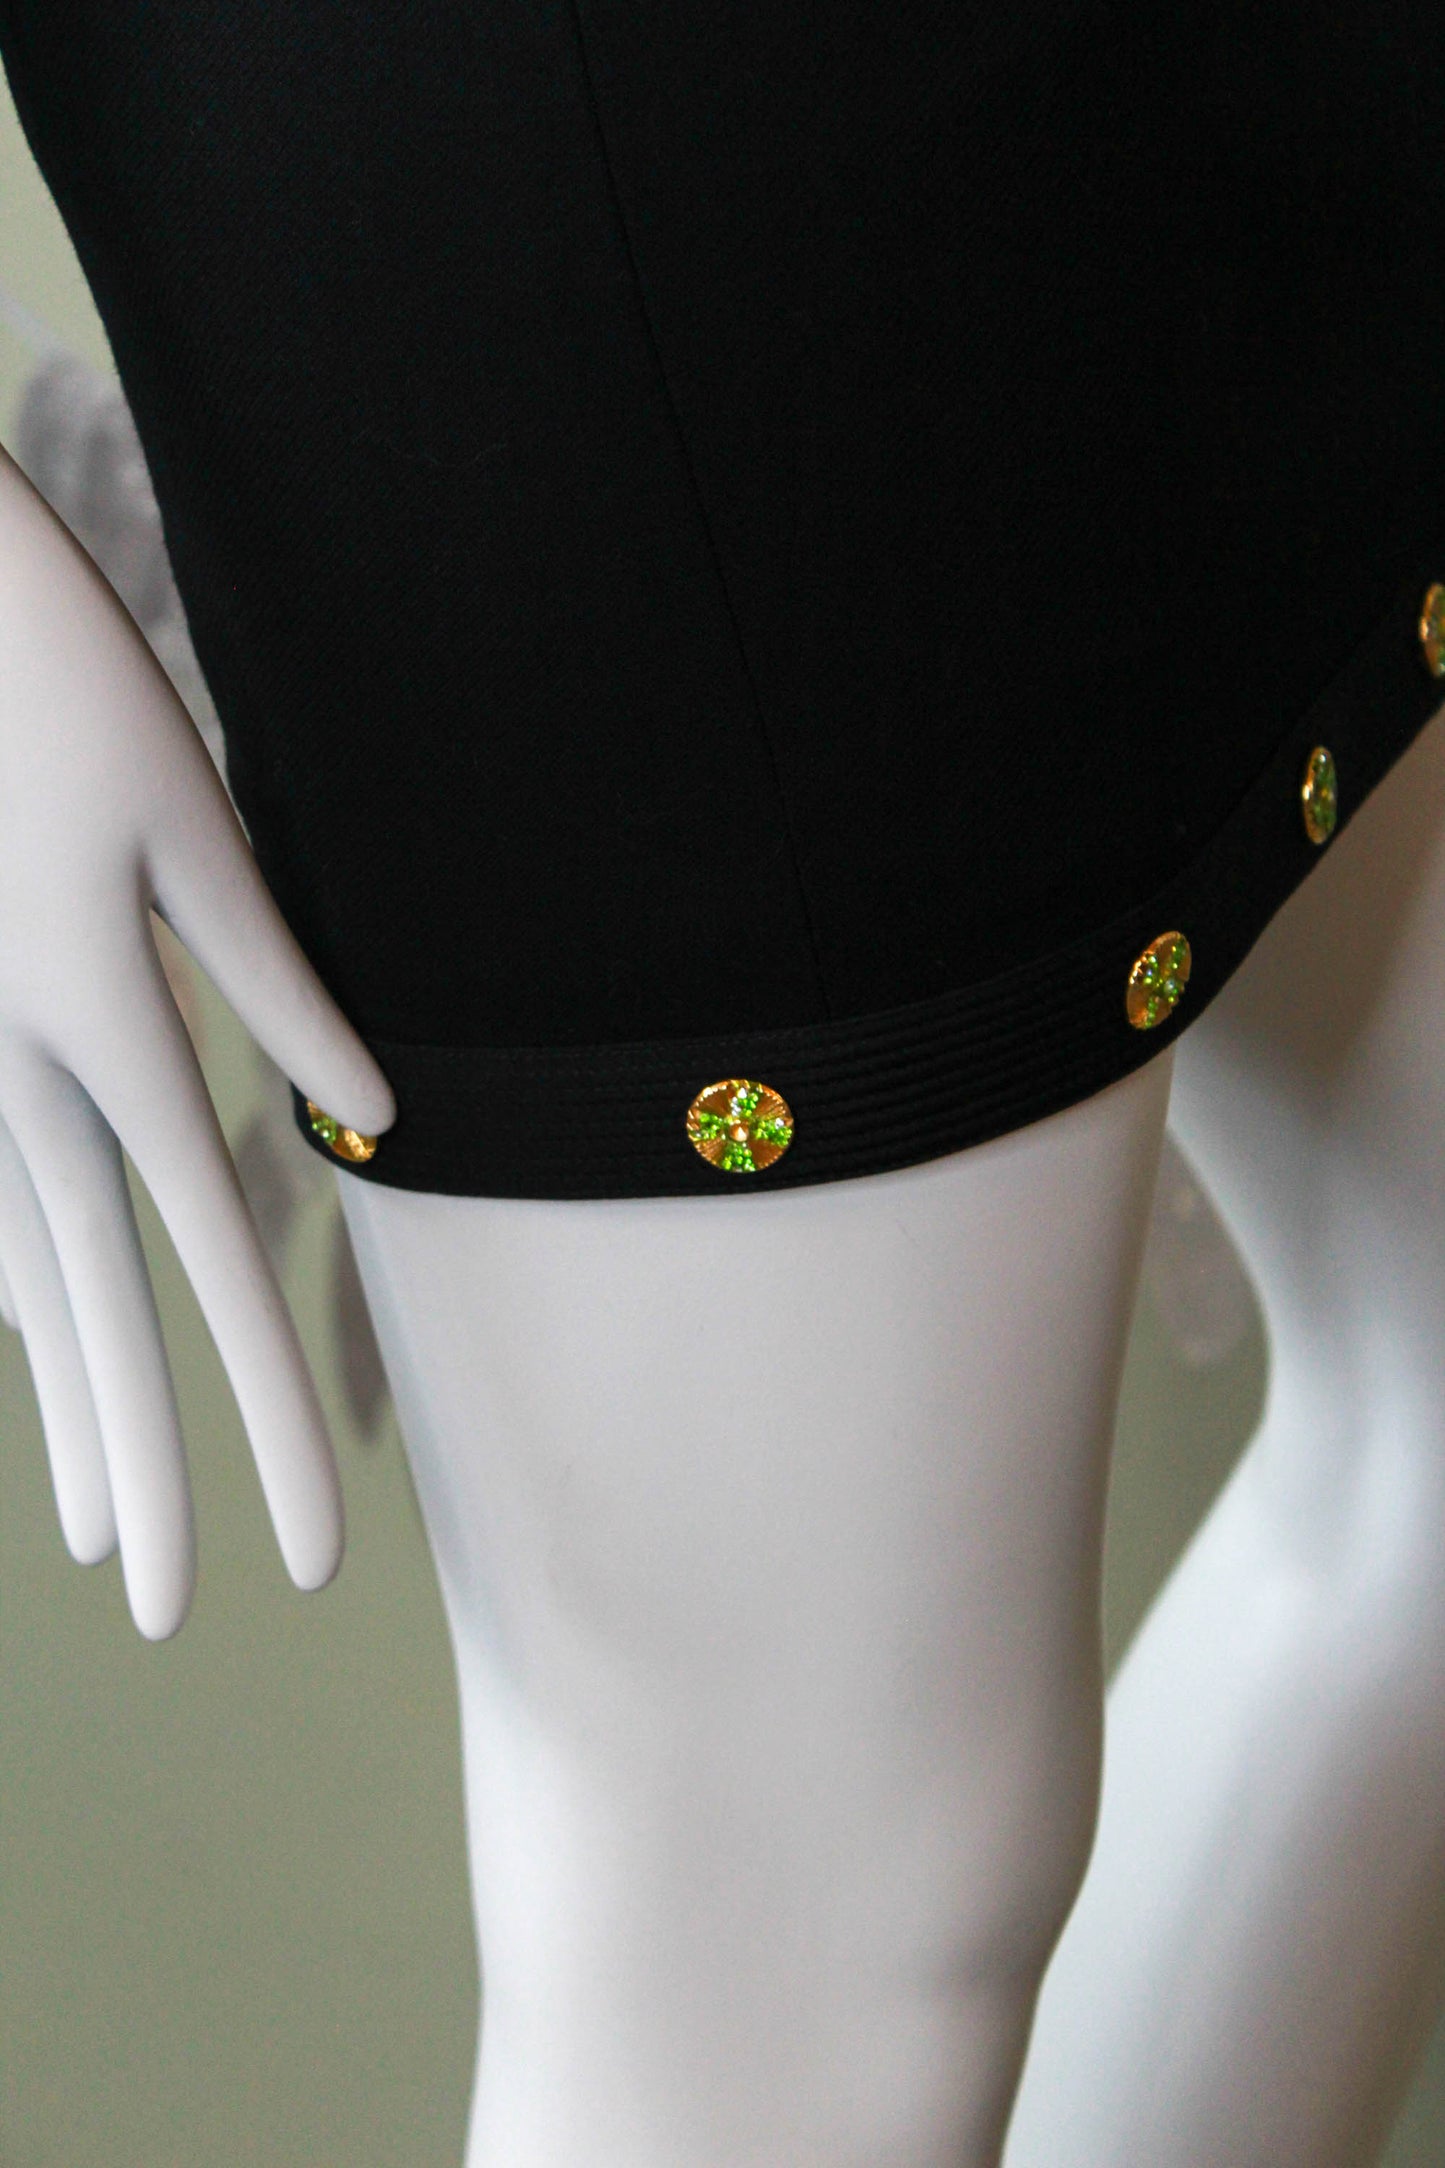 Gianni Versace Black Dress with Medallion Details, Small